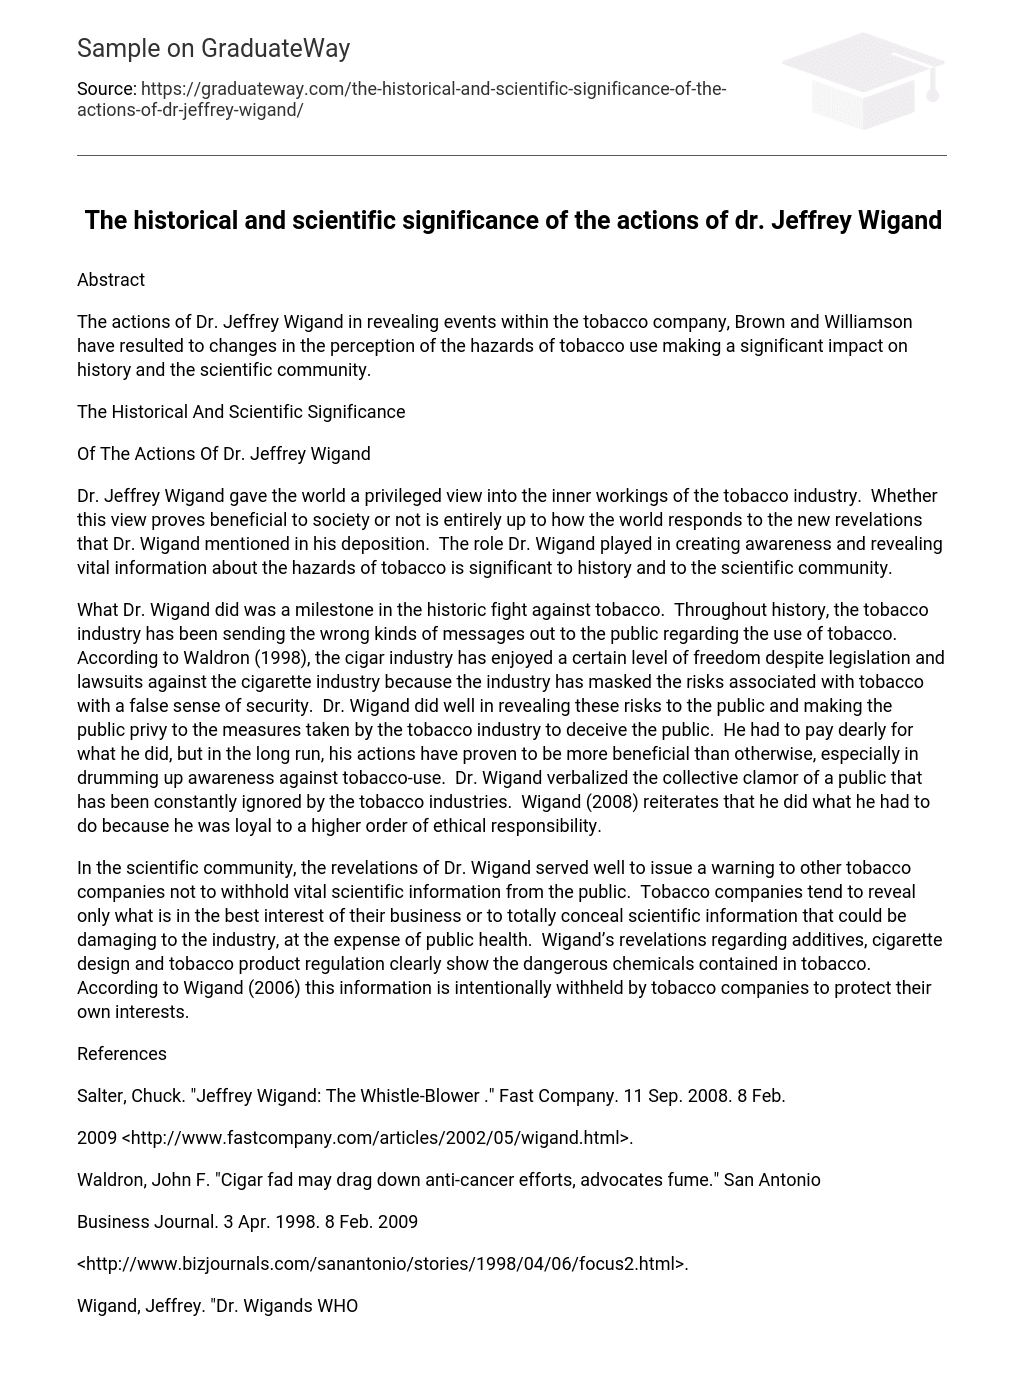 The historical and scientific significance of the actions of dr. Jeffrey Wigand